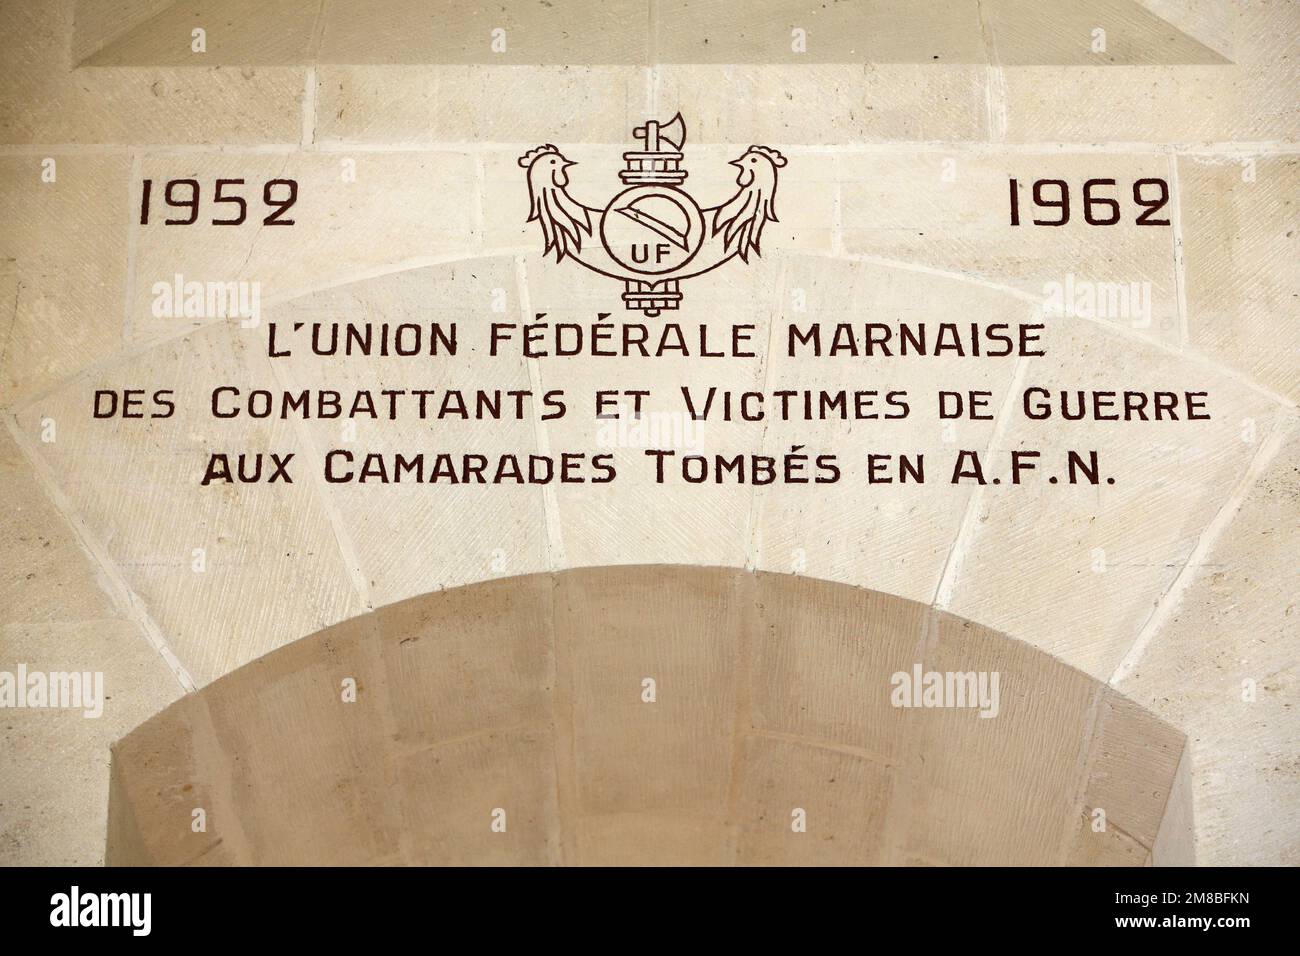 The Federal Union Marnaise combatants and war victims to fallen comrades in AFN The Memorial of the Battles of the Marne. From 1914 to 1918. Dormans. Stock Photo